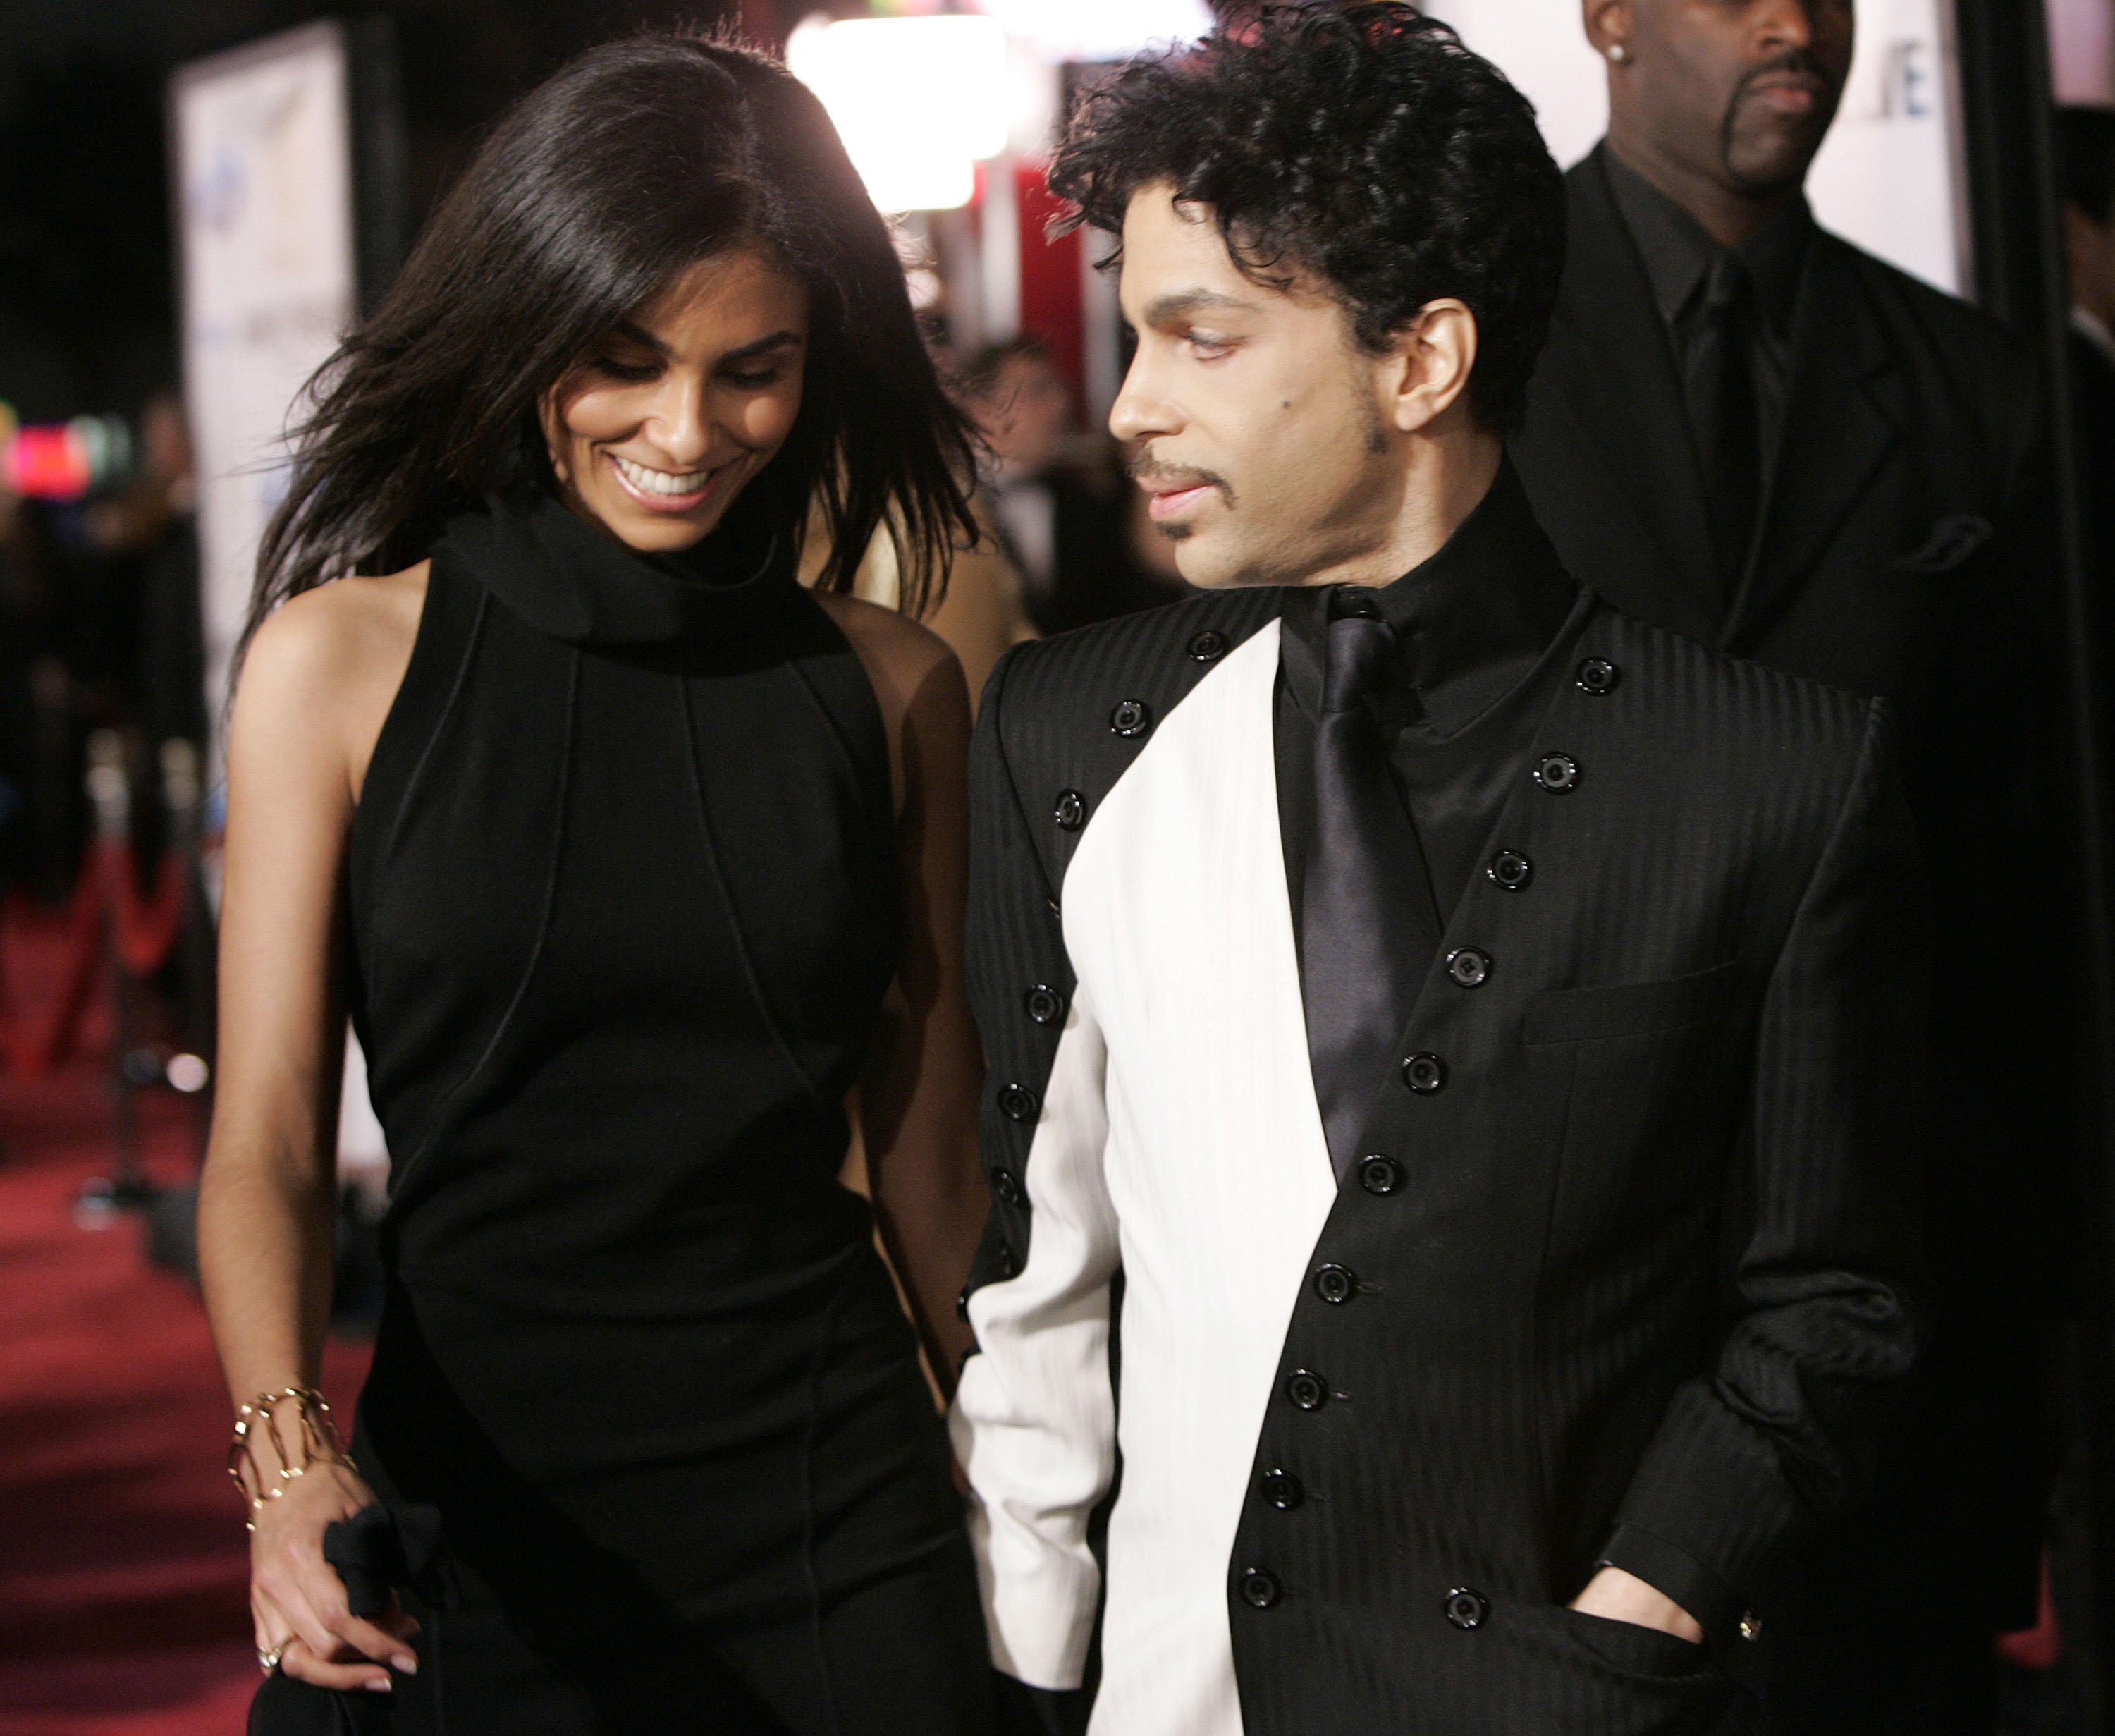 Prince and Manuela Testolini at the Los Angeles premiere of "Ocean's Twelve" on December 8, 2004 | Source: Getty Images